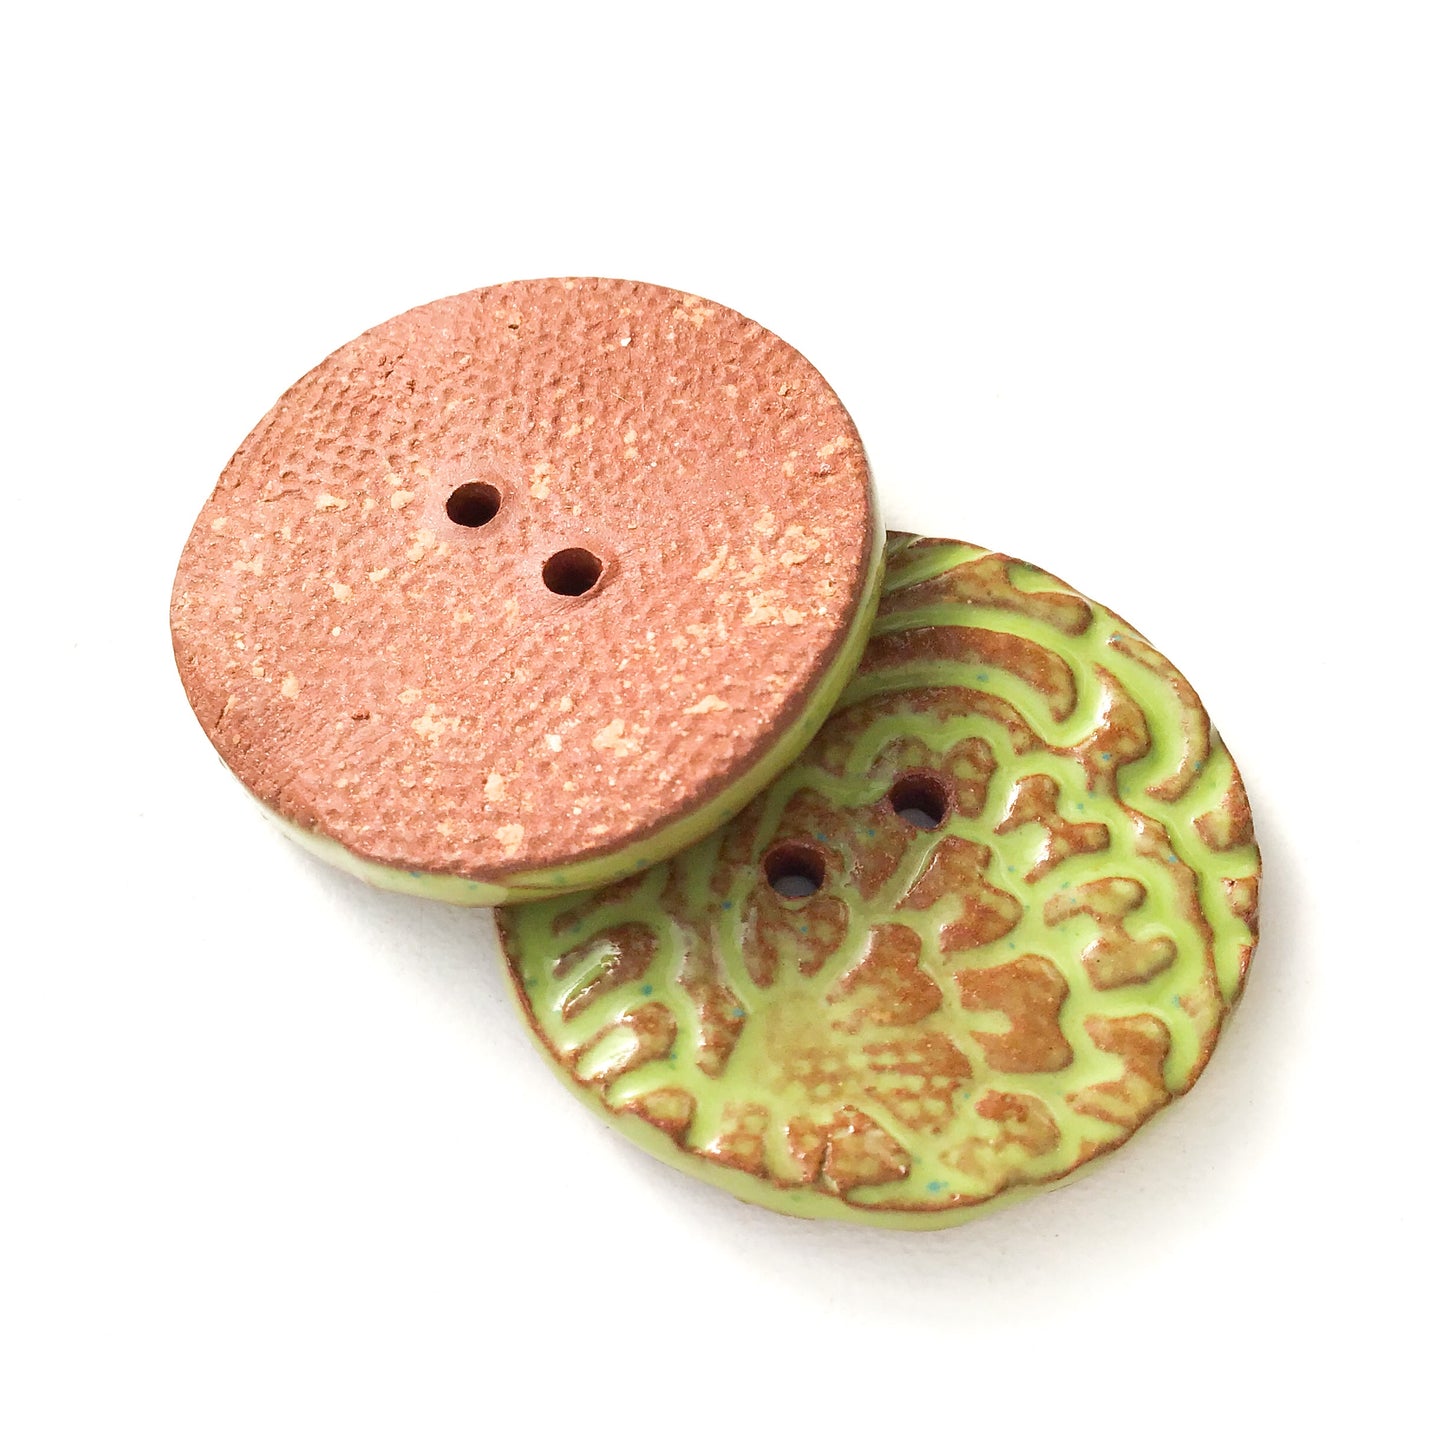 Hand Stamped Speckled Green Ceramic Buttons on Red Clay - 1 1/8" - 2 Pack